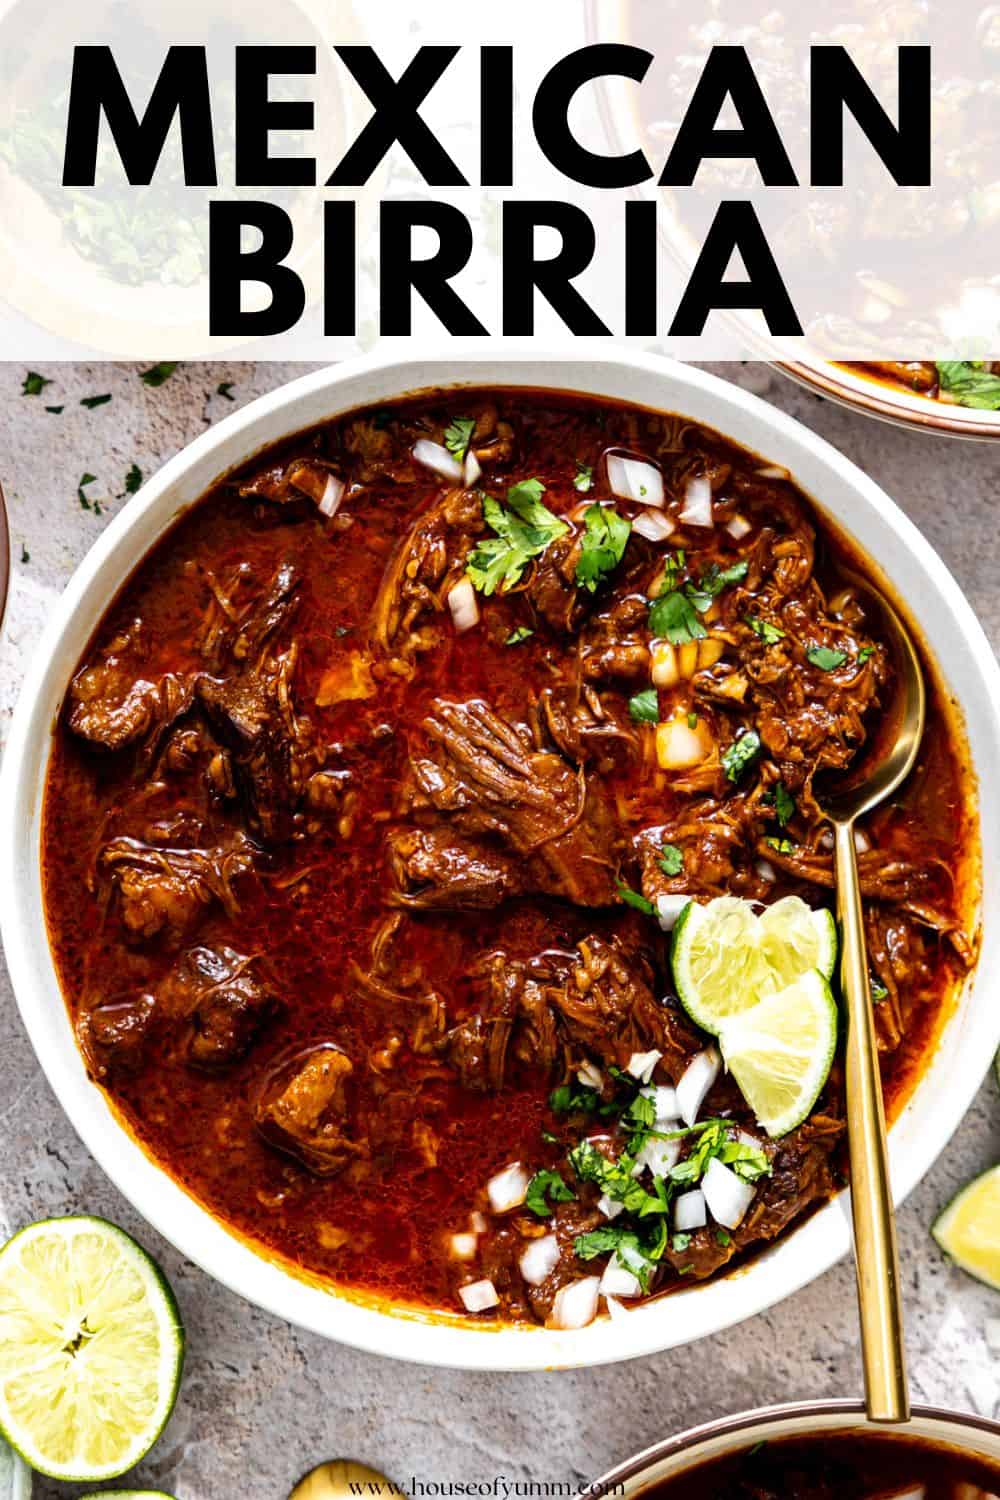 Mexican Birria with text.